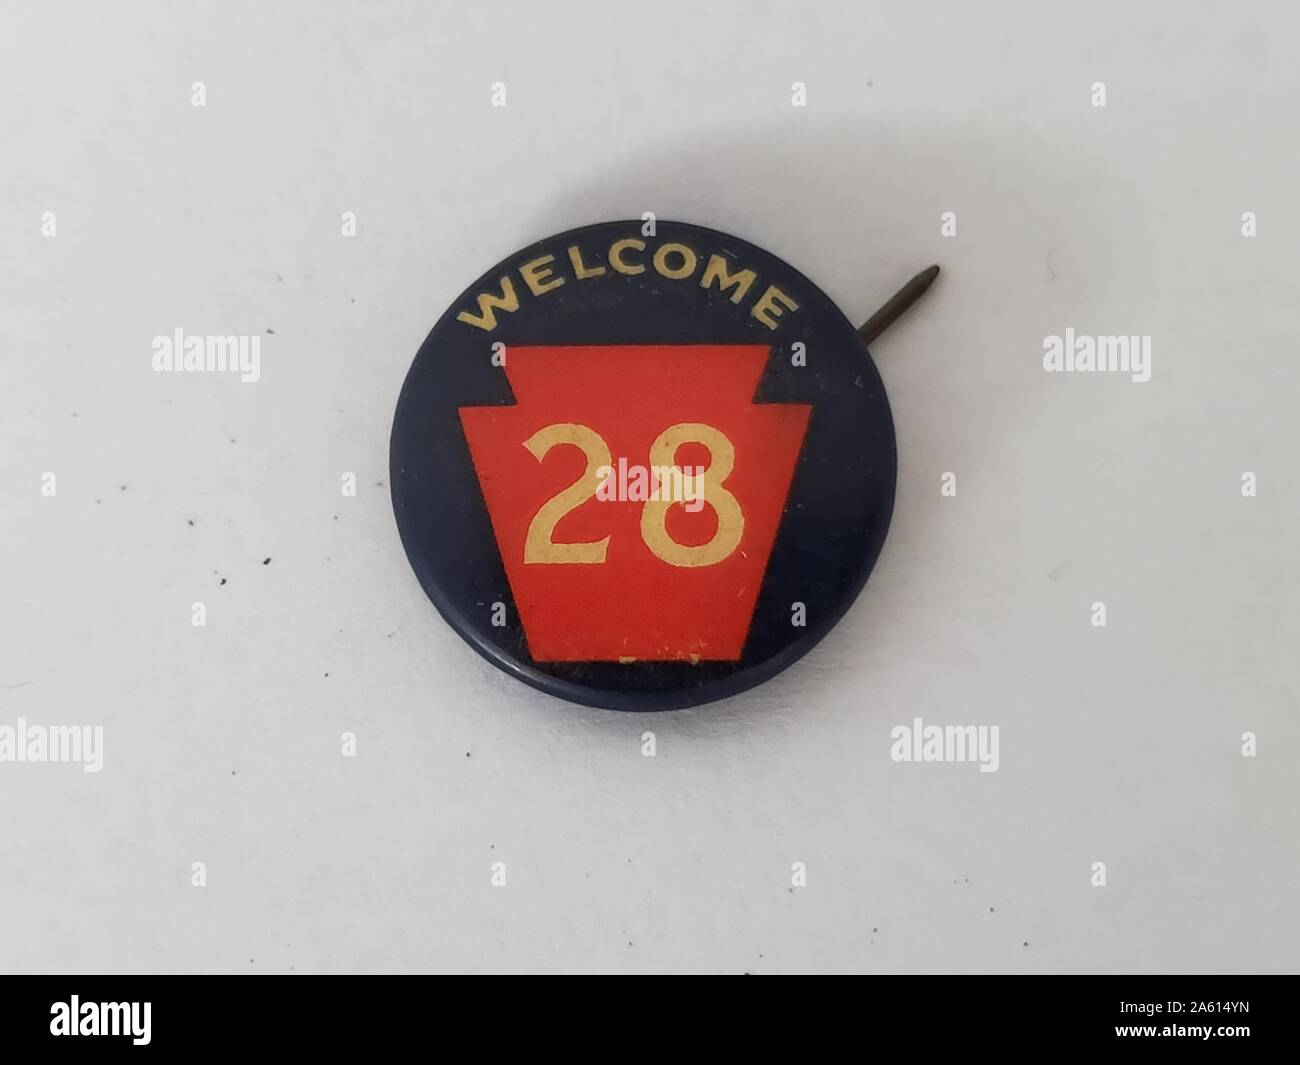 Red, cream, and black pin-back button or badge, with an image of a red keystone and the text 'Welcome 28' issued for the WWI return of the 28th 'Keystone' Infantry Division, United States of America, 1918. () Stock Photo